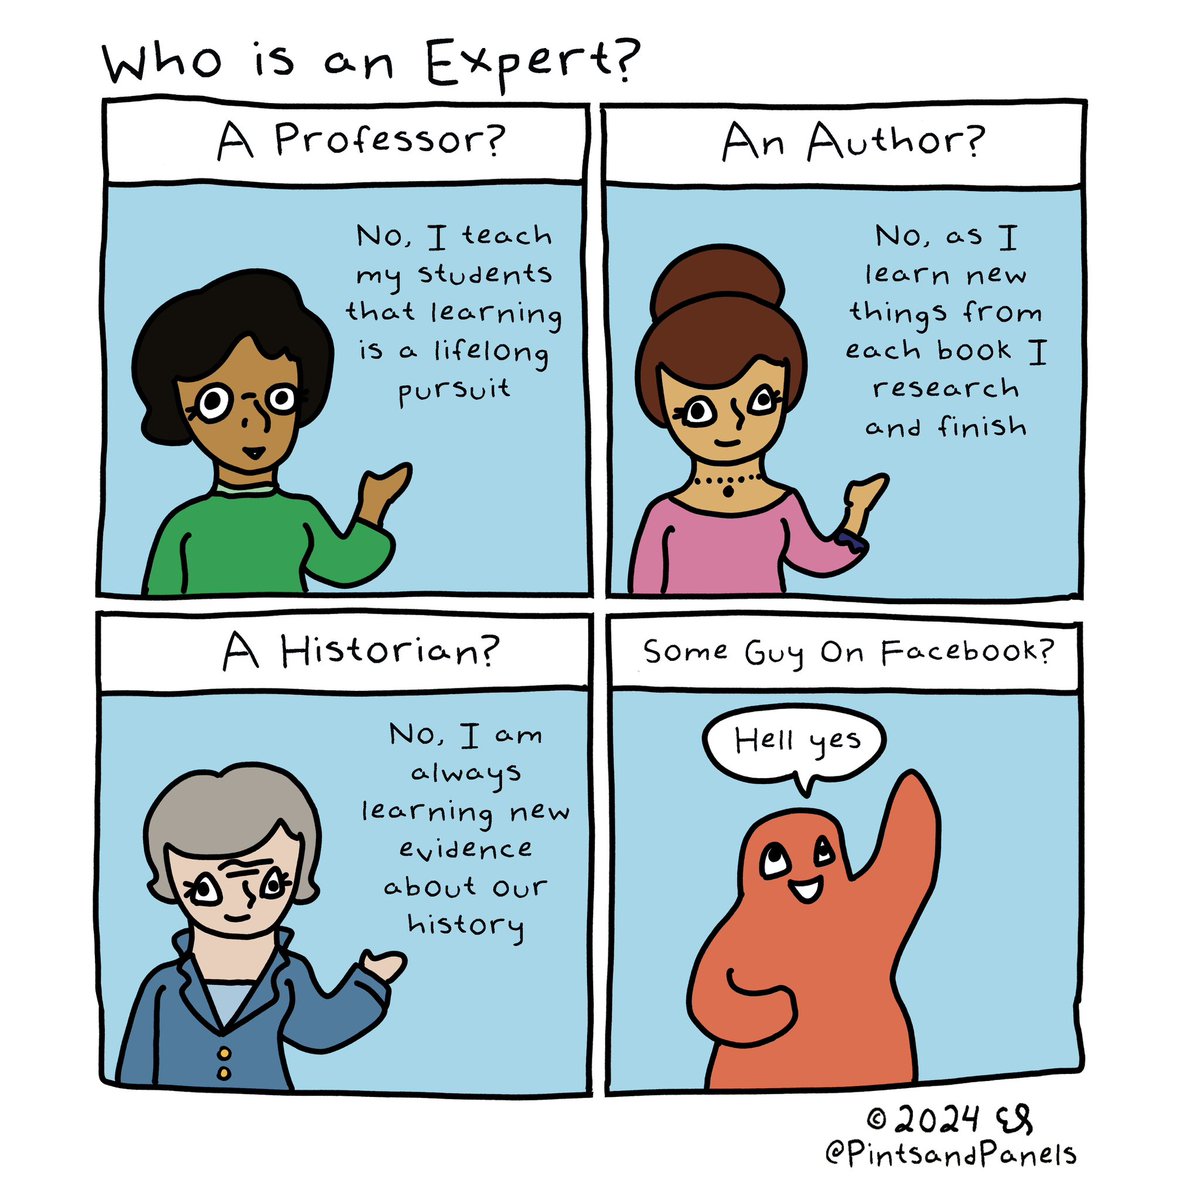 Who is an expert?